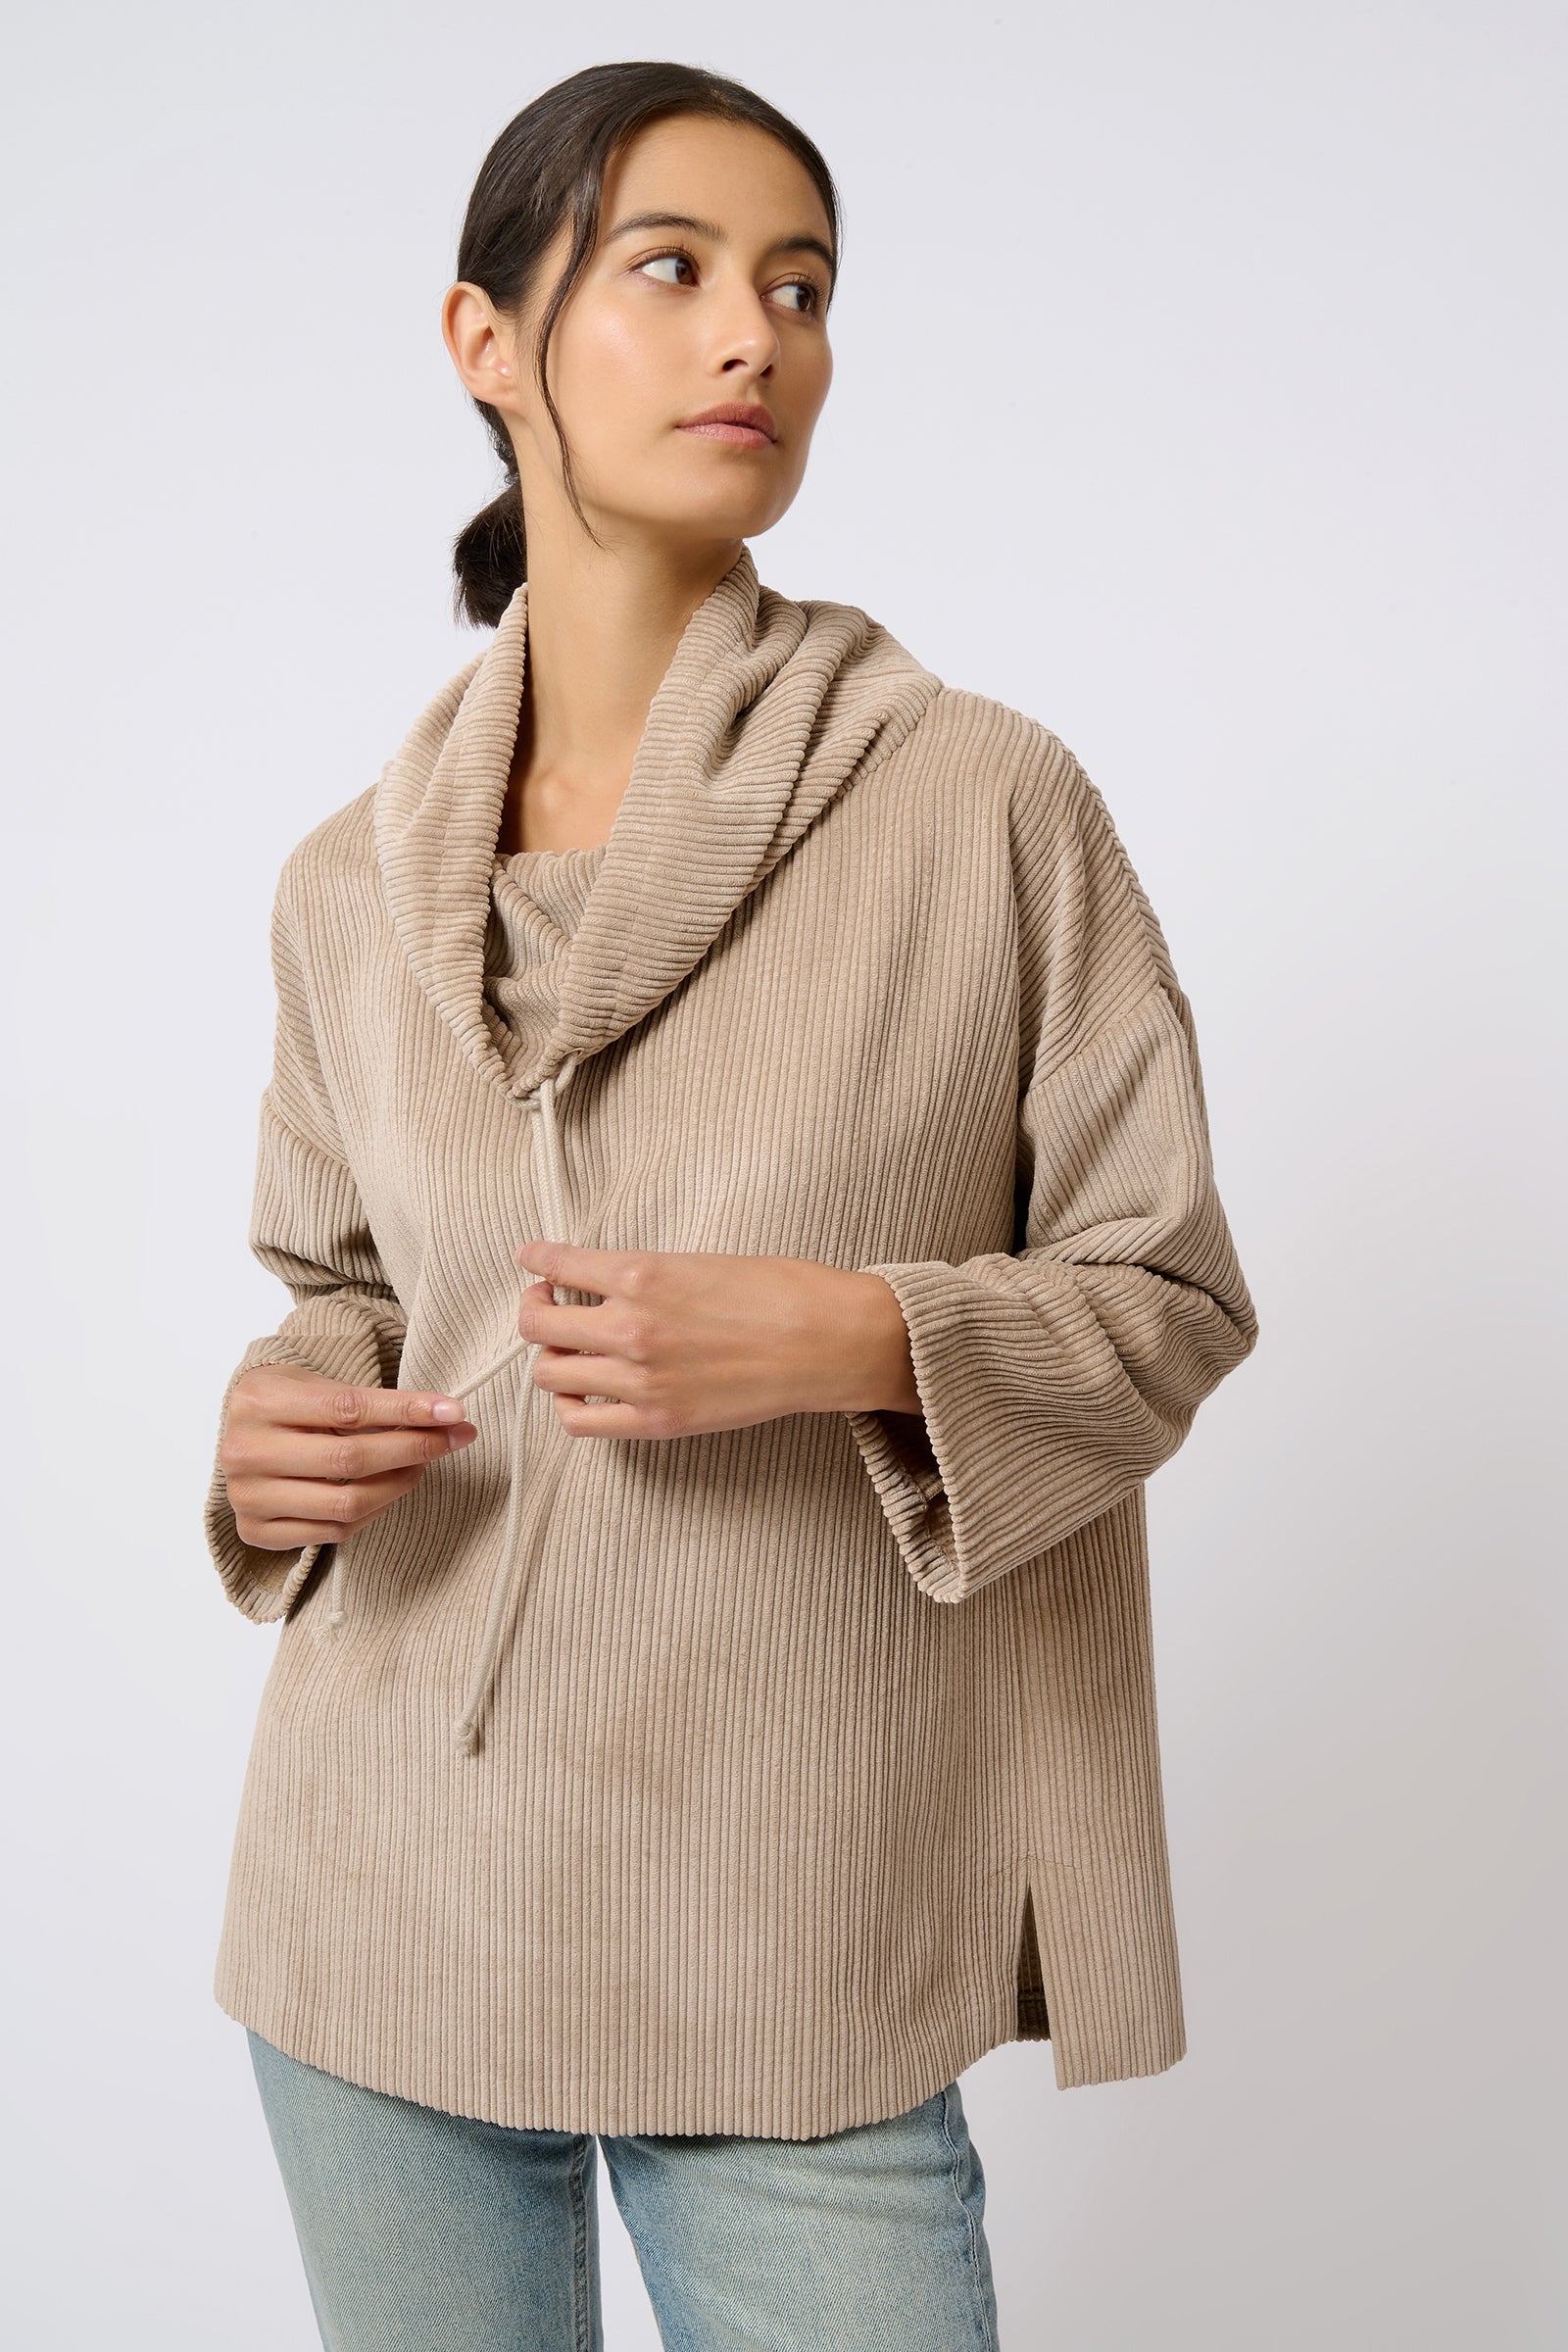 Kal Rieman Debbie Drawstring Pullover in Beige on Model with Hands on Strings Front View